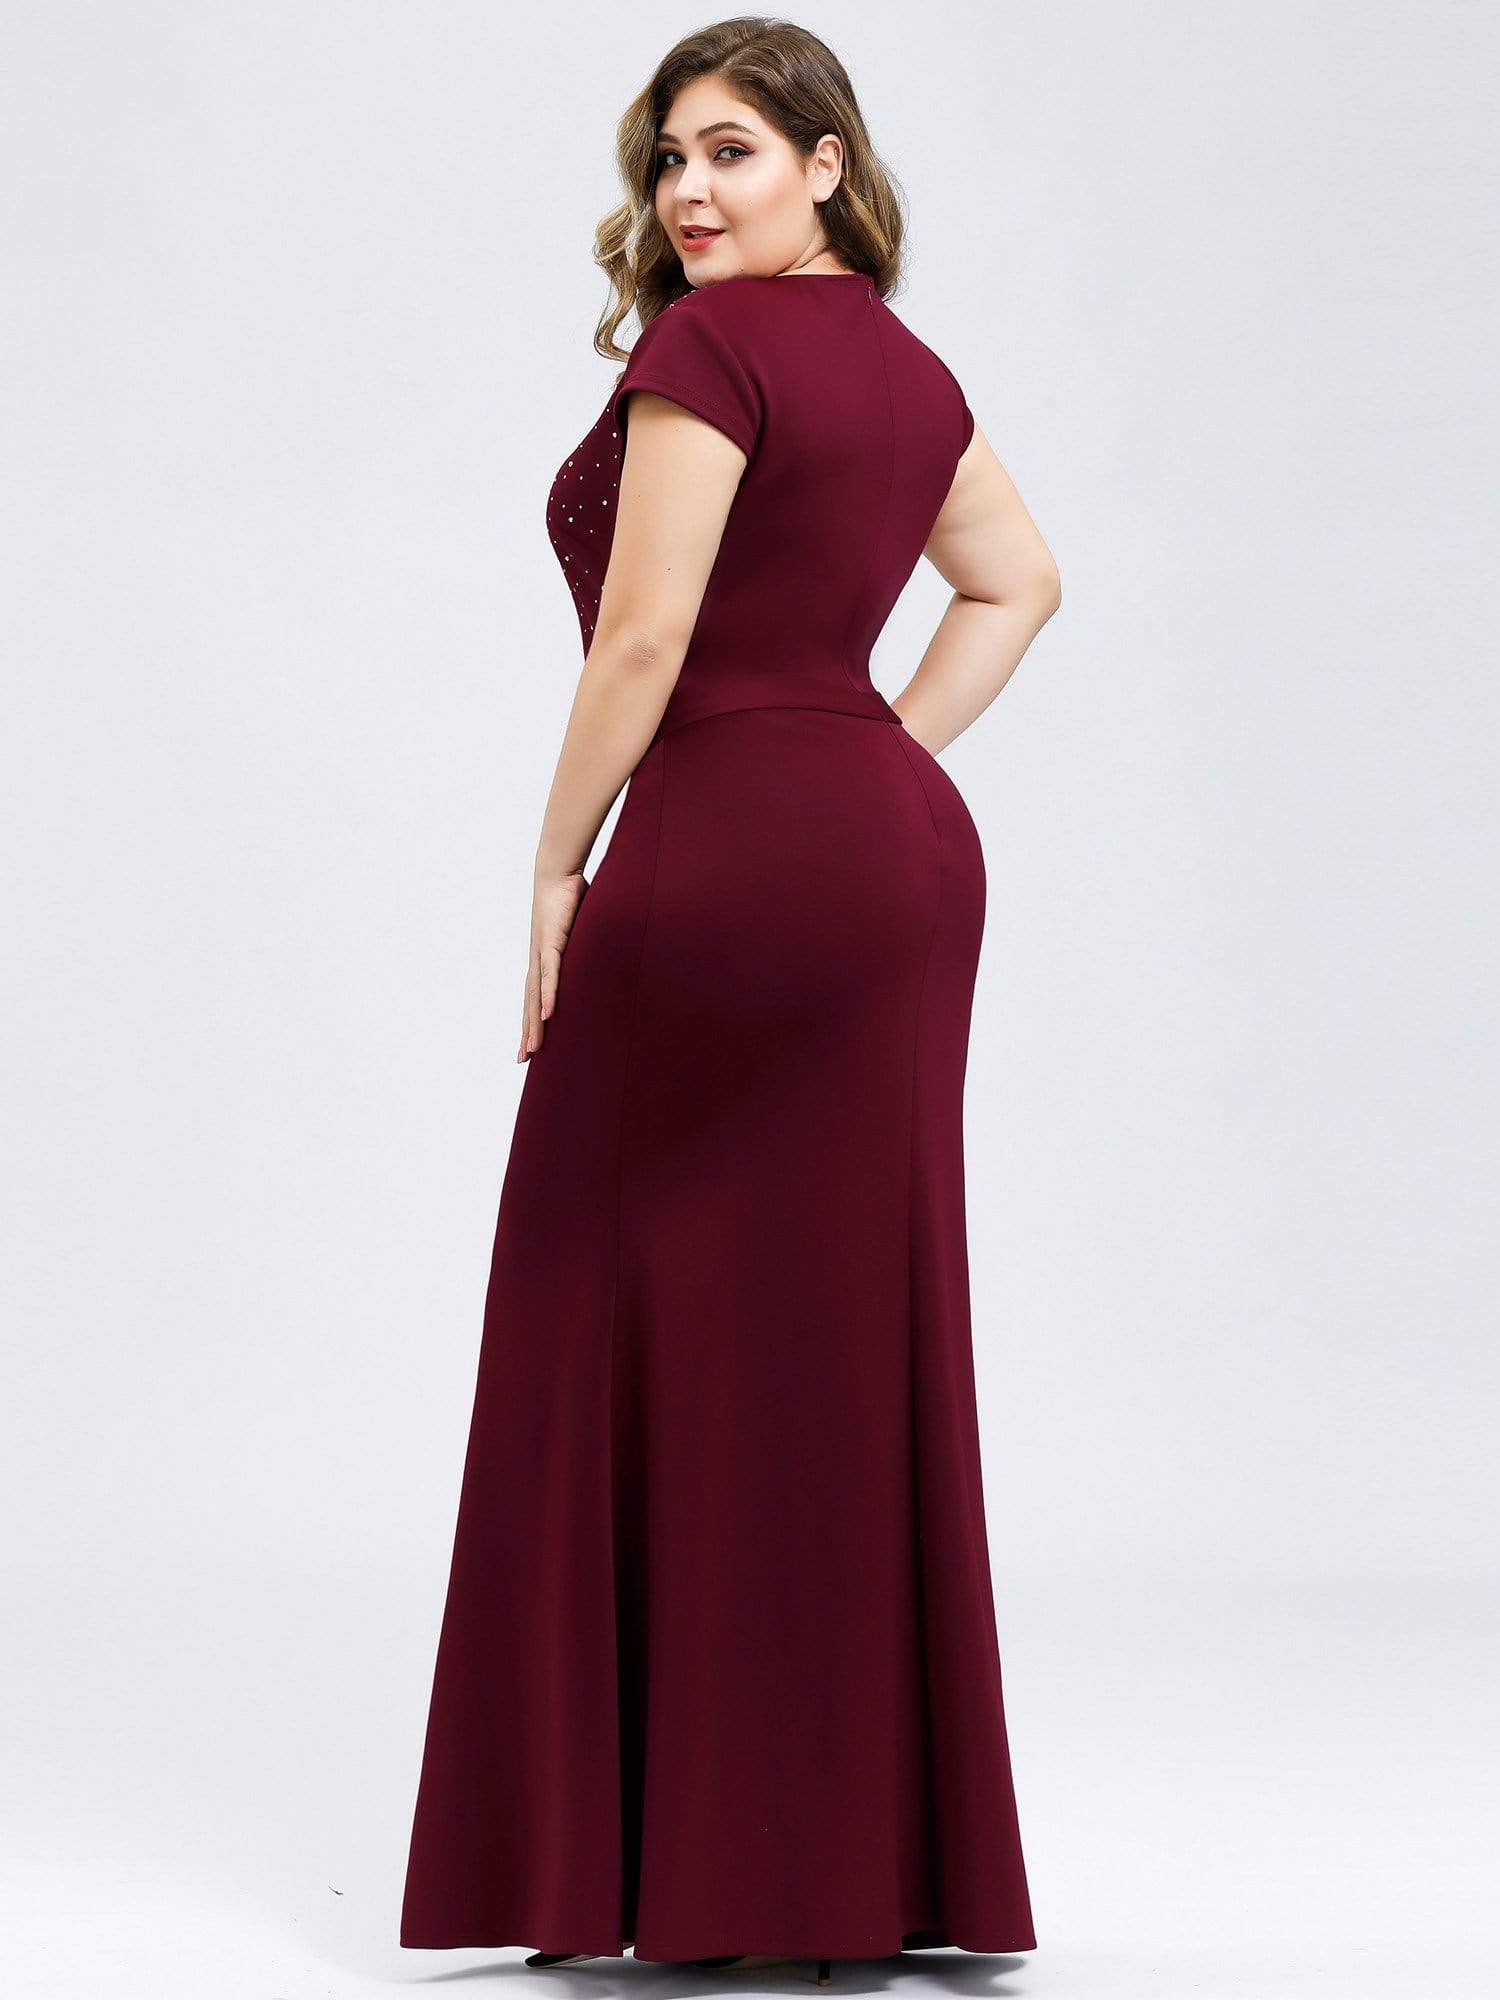 Plus Size Mother of Bridesmaid Dress with Shimmery Rhinestone